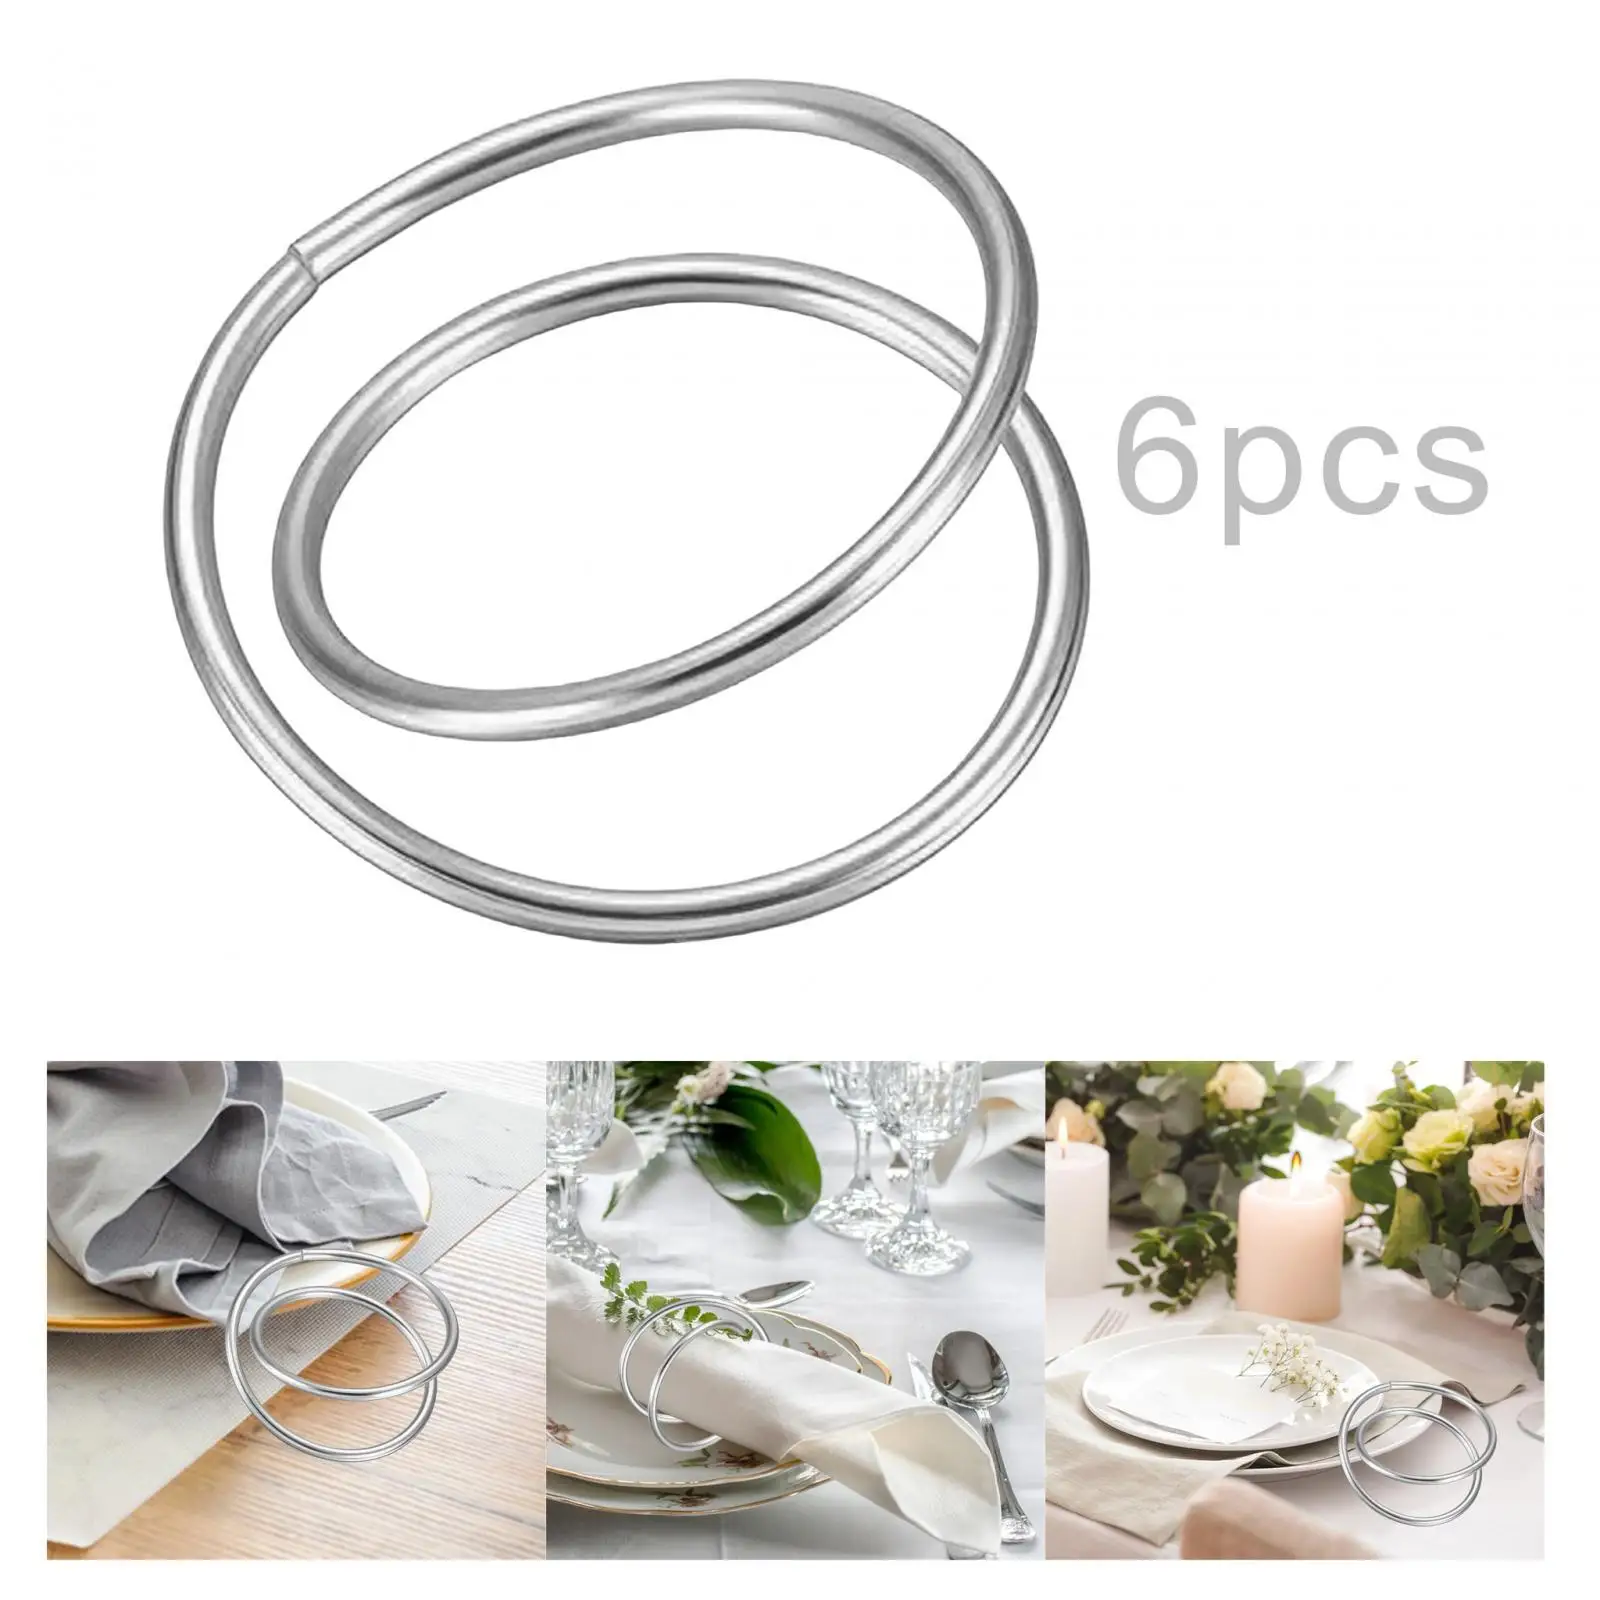 6x Napkin Rings Decoration Dining Table Napkin Buckle Metal Napkin Holder for Party Anniversary Festival Thanksgiving Hotel